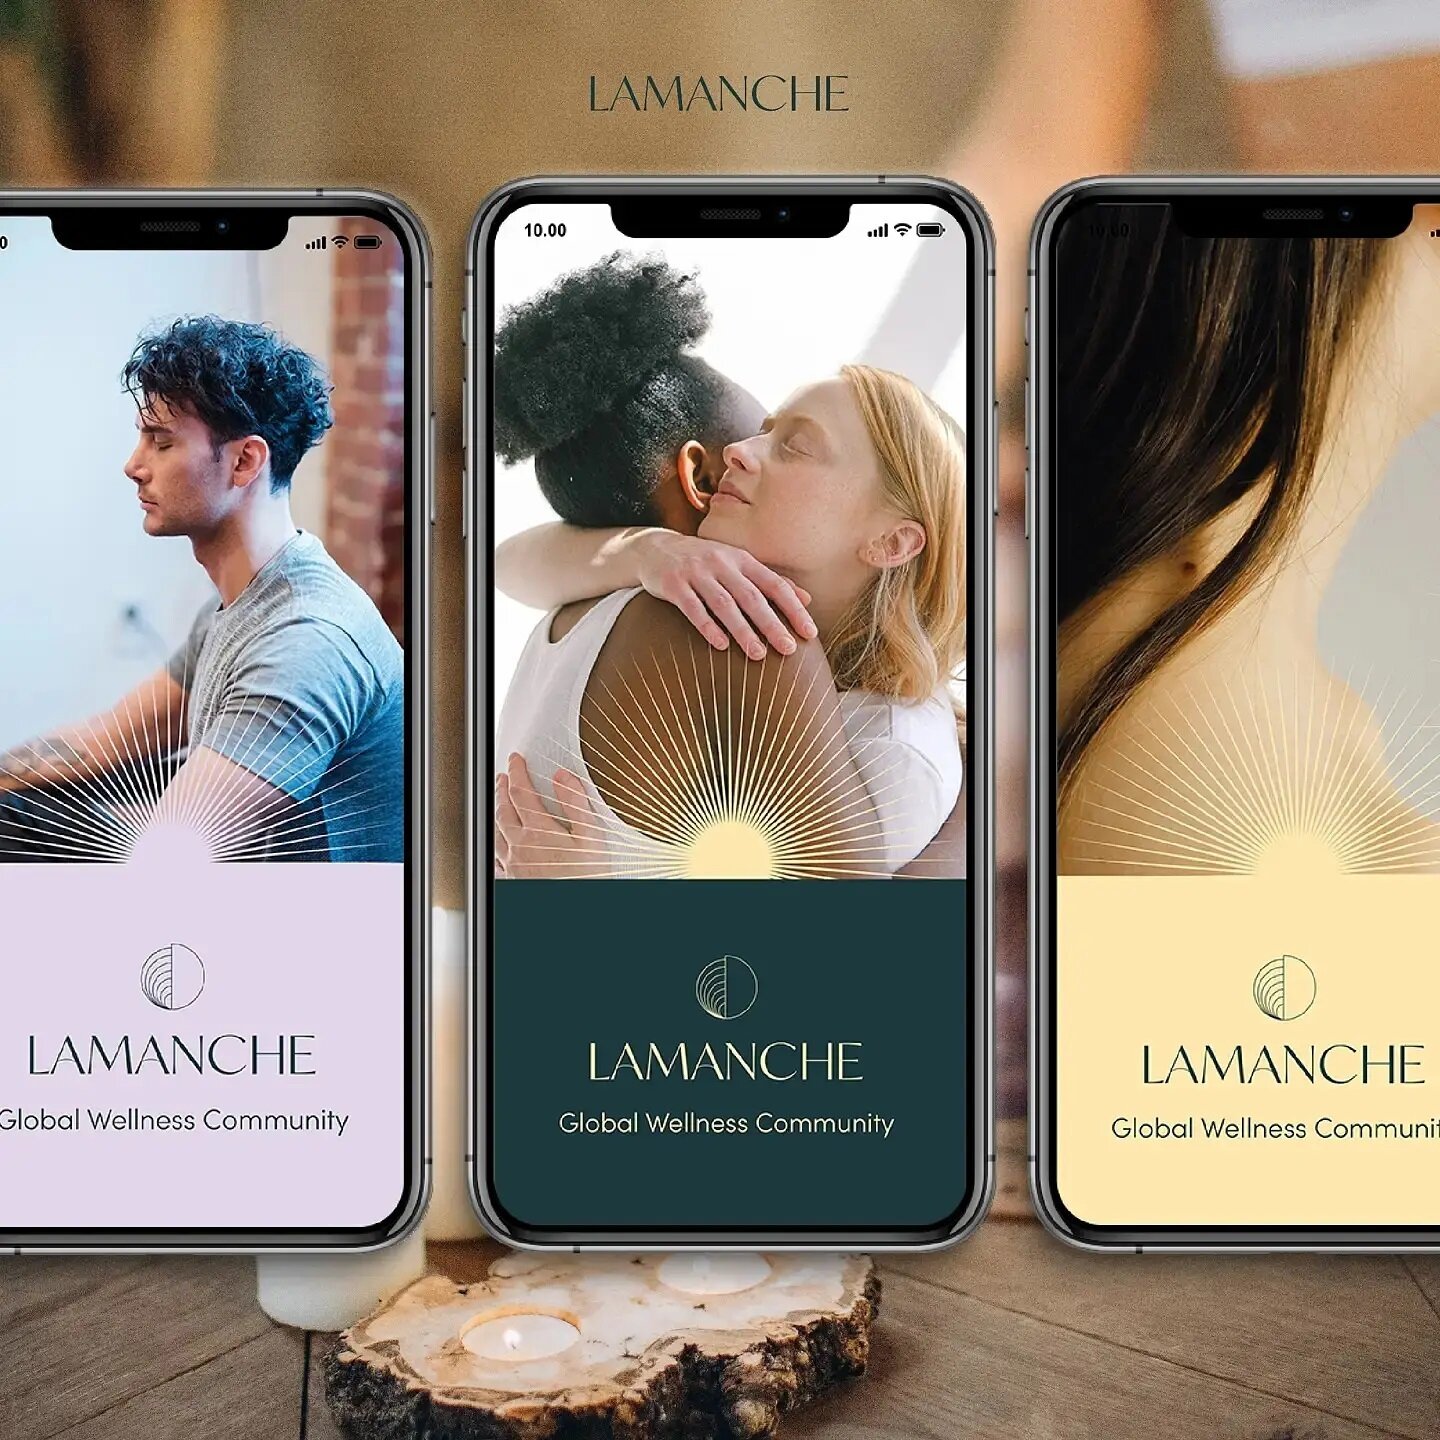 💜Lamanche - Brand Identity💜

👉Lamanche is a global wellness community dedicated to integrative medicine, nutrition, nontoxic cosmetology, and meaningful relationships. 
🤗Their goal is to enlighten people, helping them feel and look better. 
They 